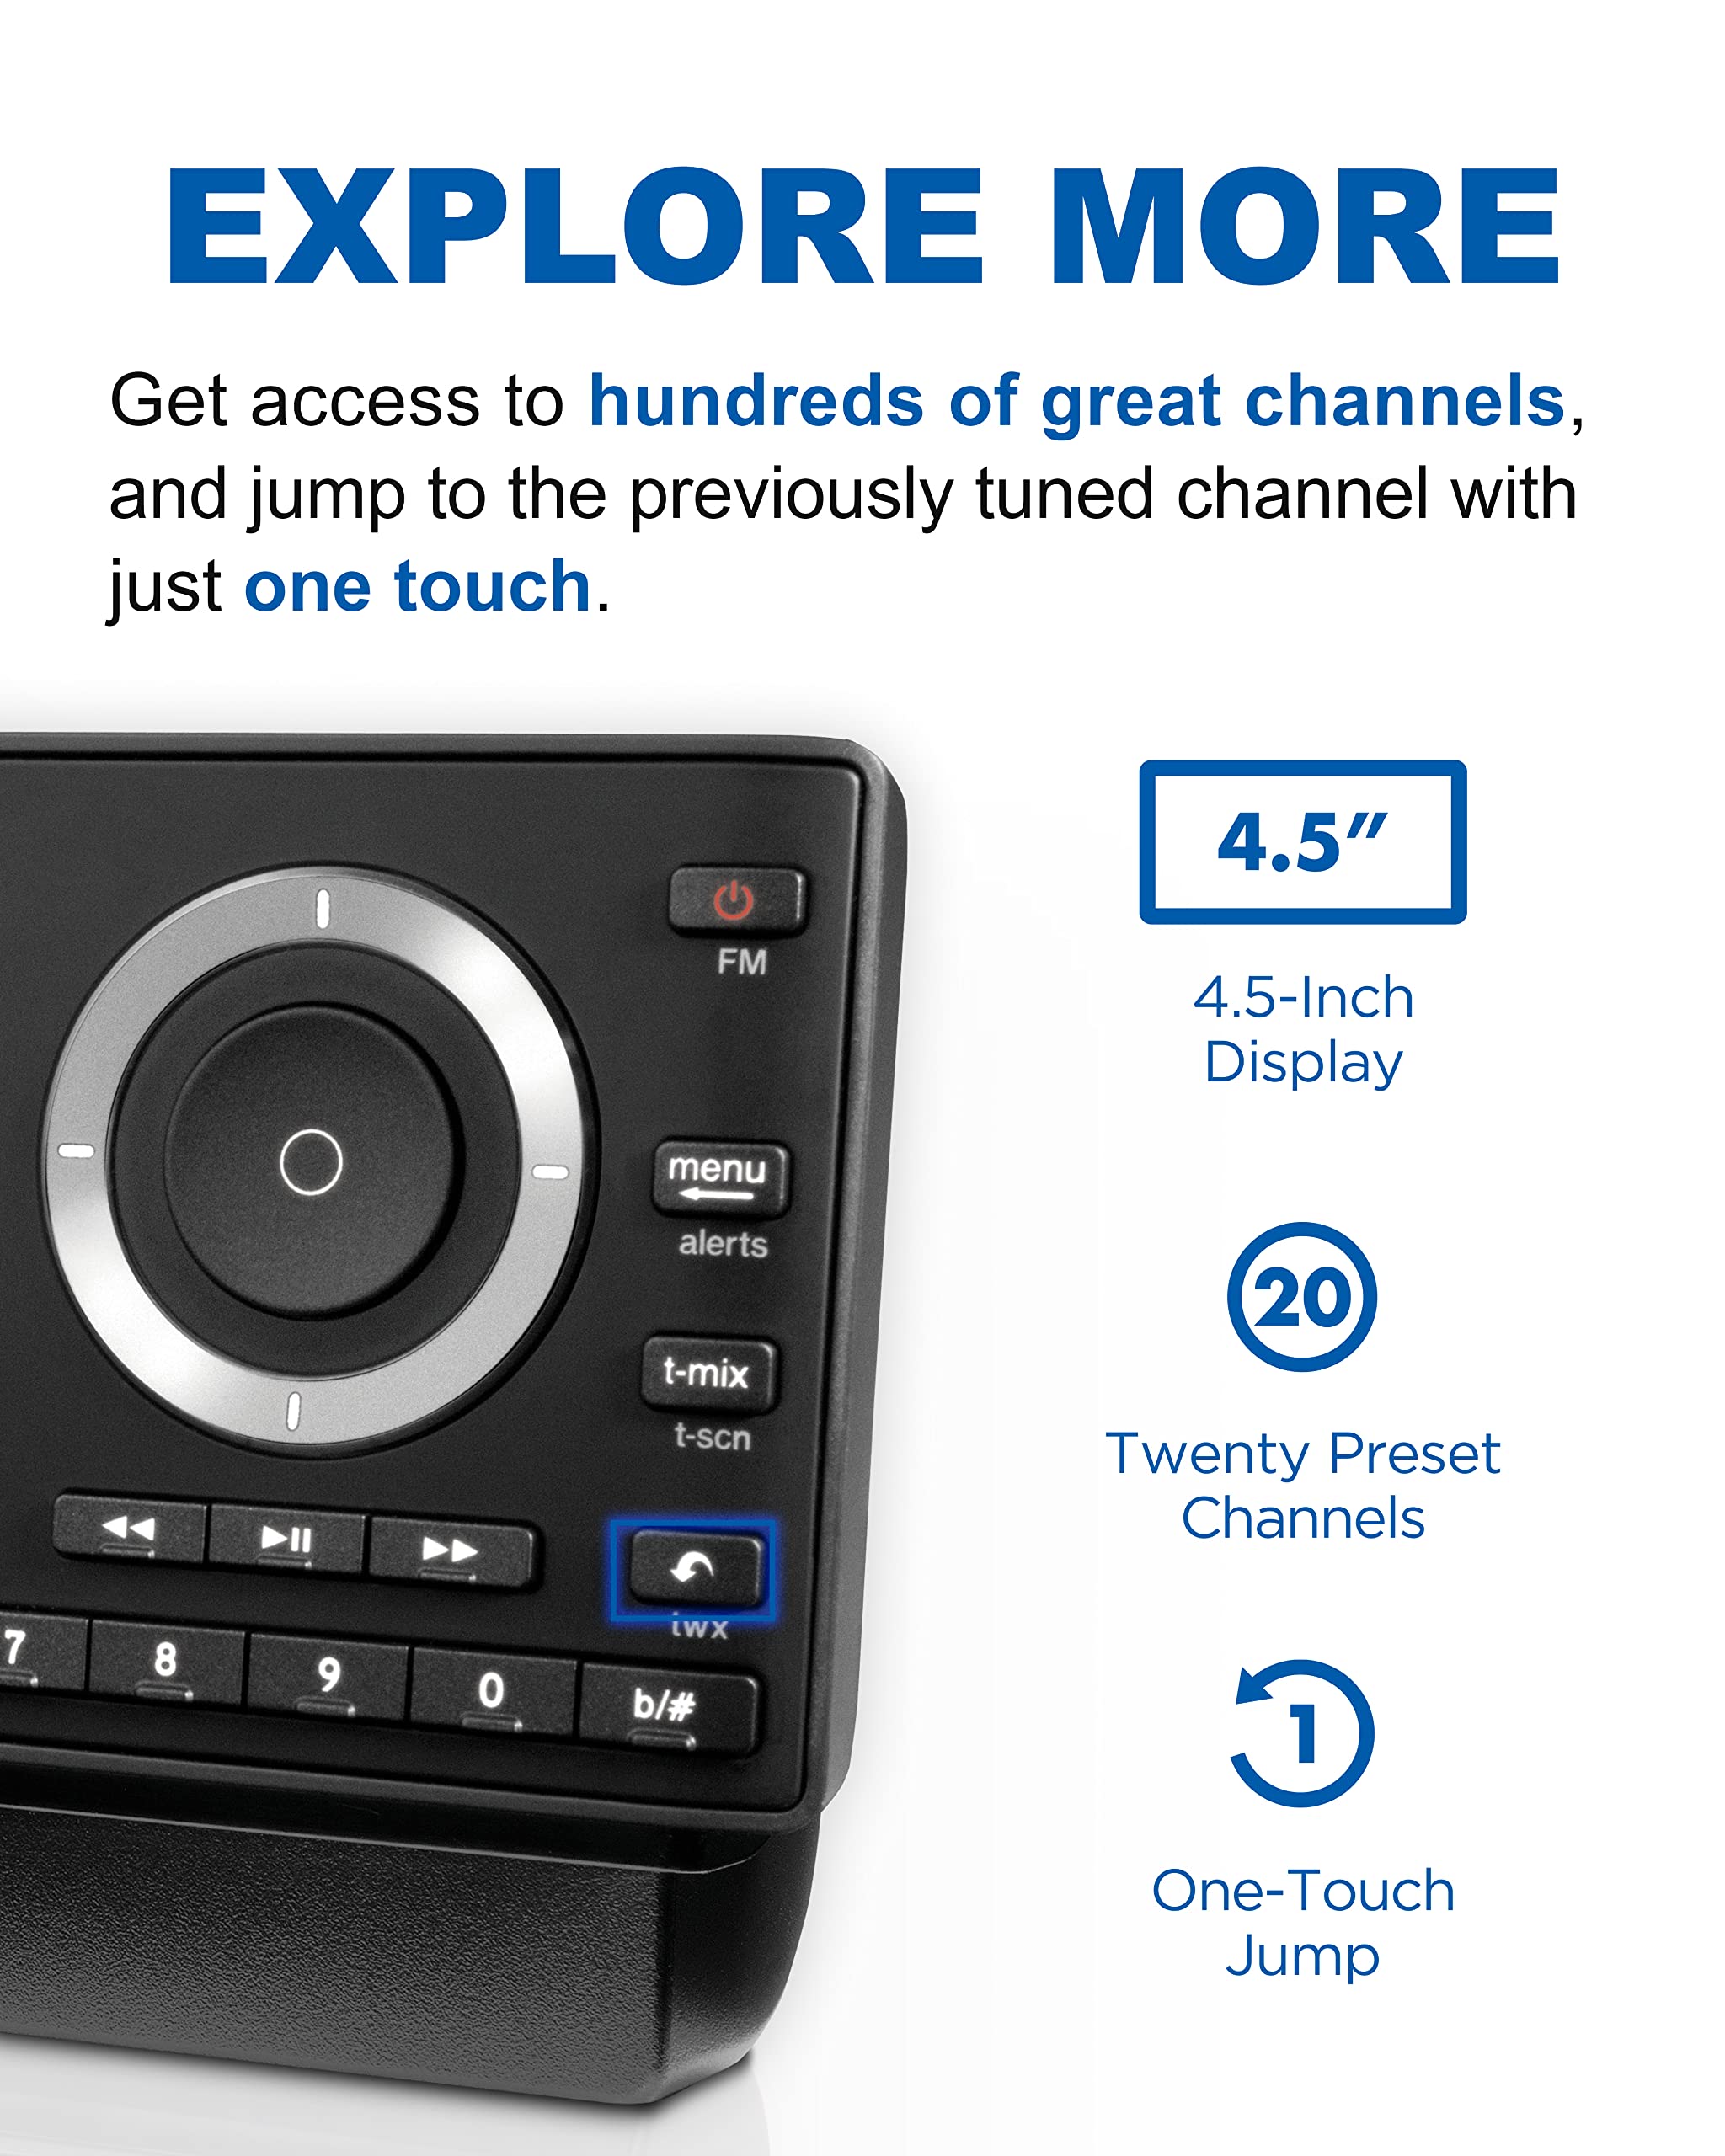 SiriusXM Onyx Plus Satellite Radio w/ Vehicle Kit, Enjoy SiriusXM Through your Existing Car Stereo for as Low as $5/month + $60 Service Card with Activation